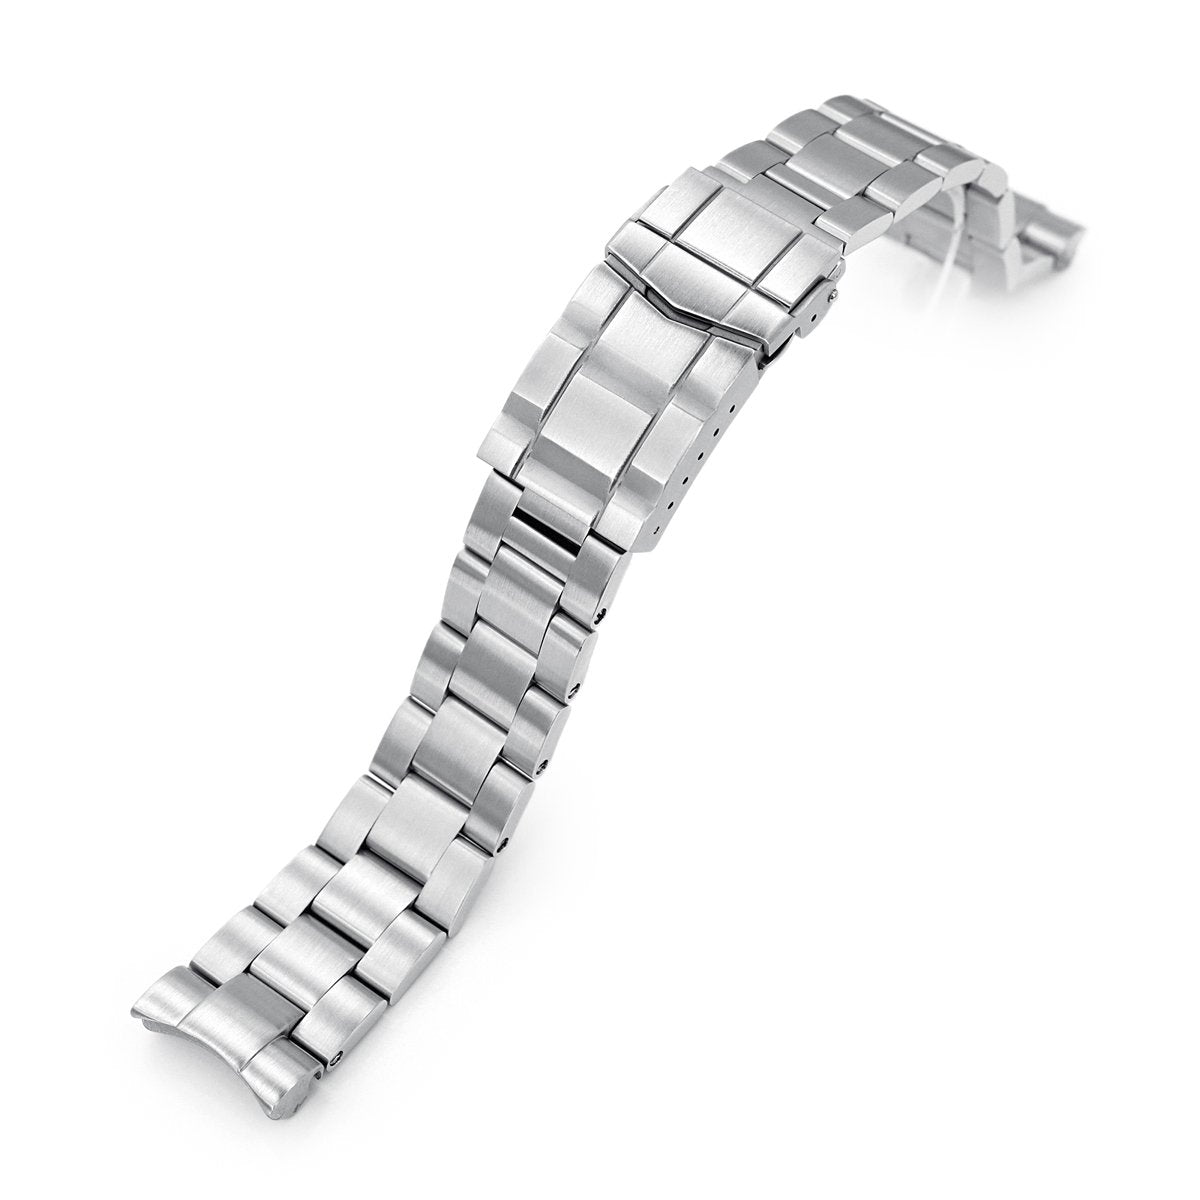 20mm Super-O Boyer 316L Stainless Steel Watch Bracelet for Seiko Mini Turtles SRPC35 SUB Clasp Brushed Strapcode Watch Bands